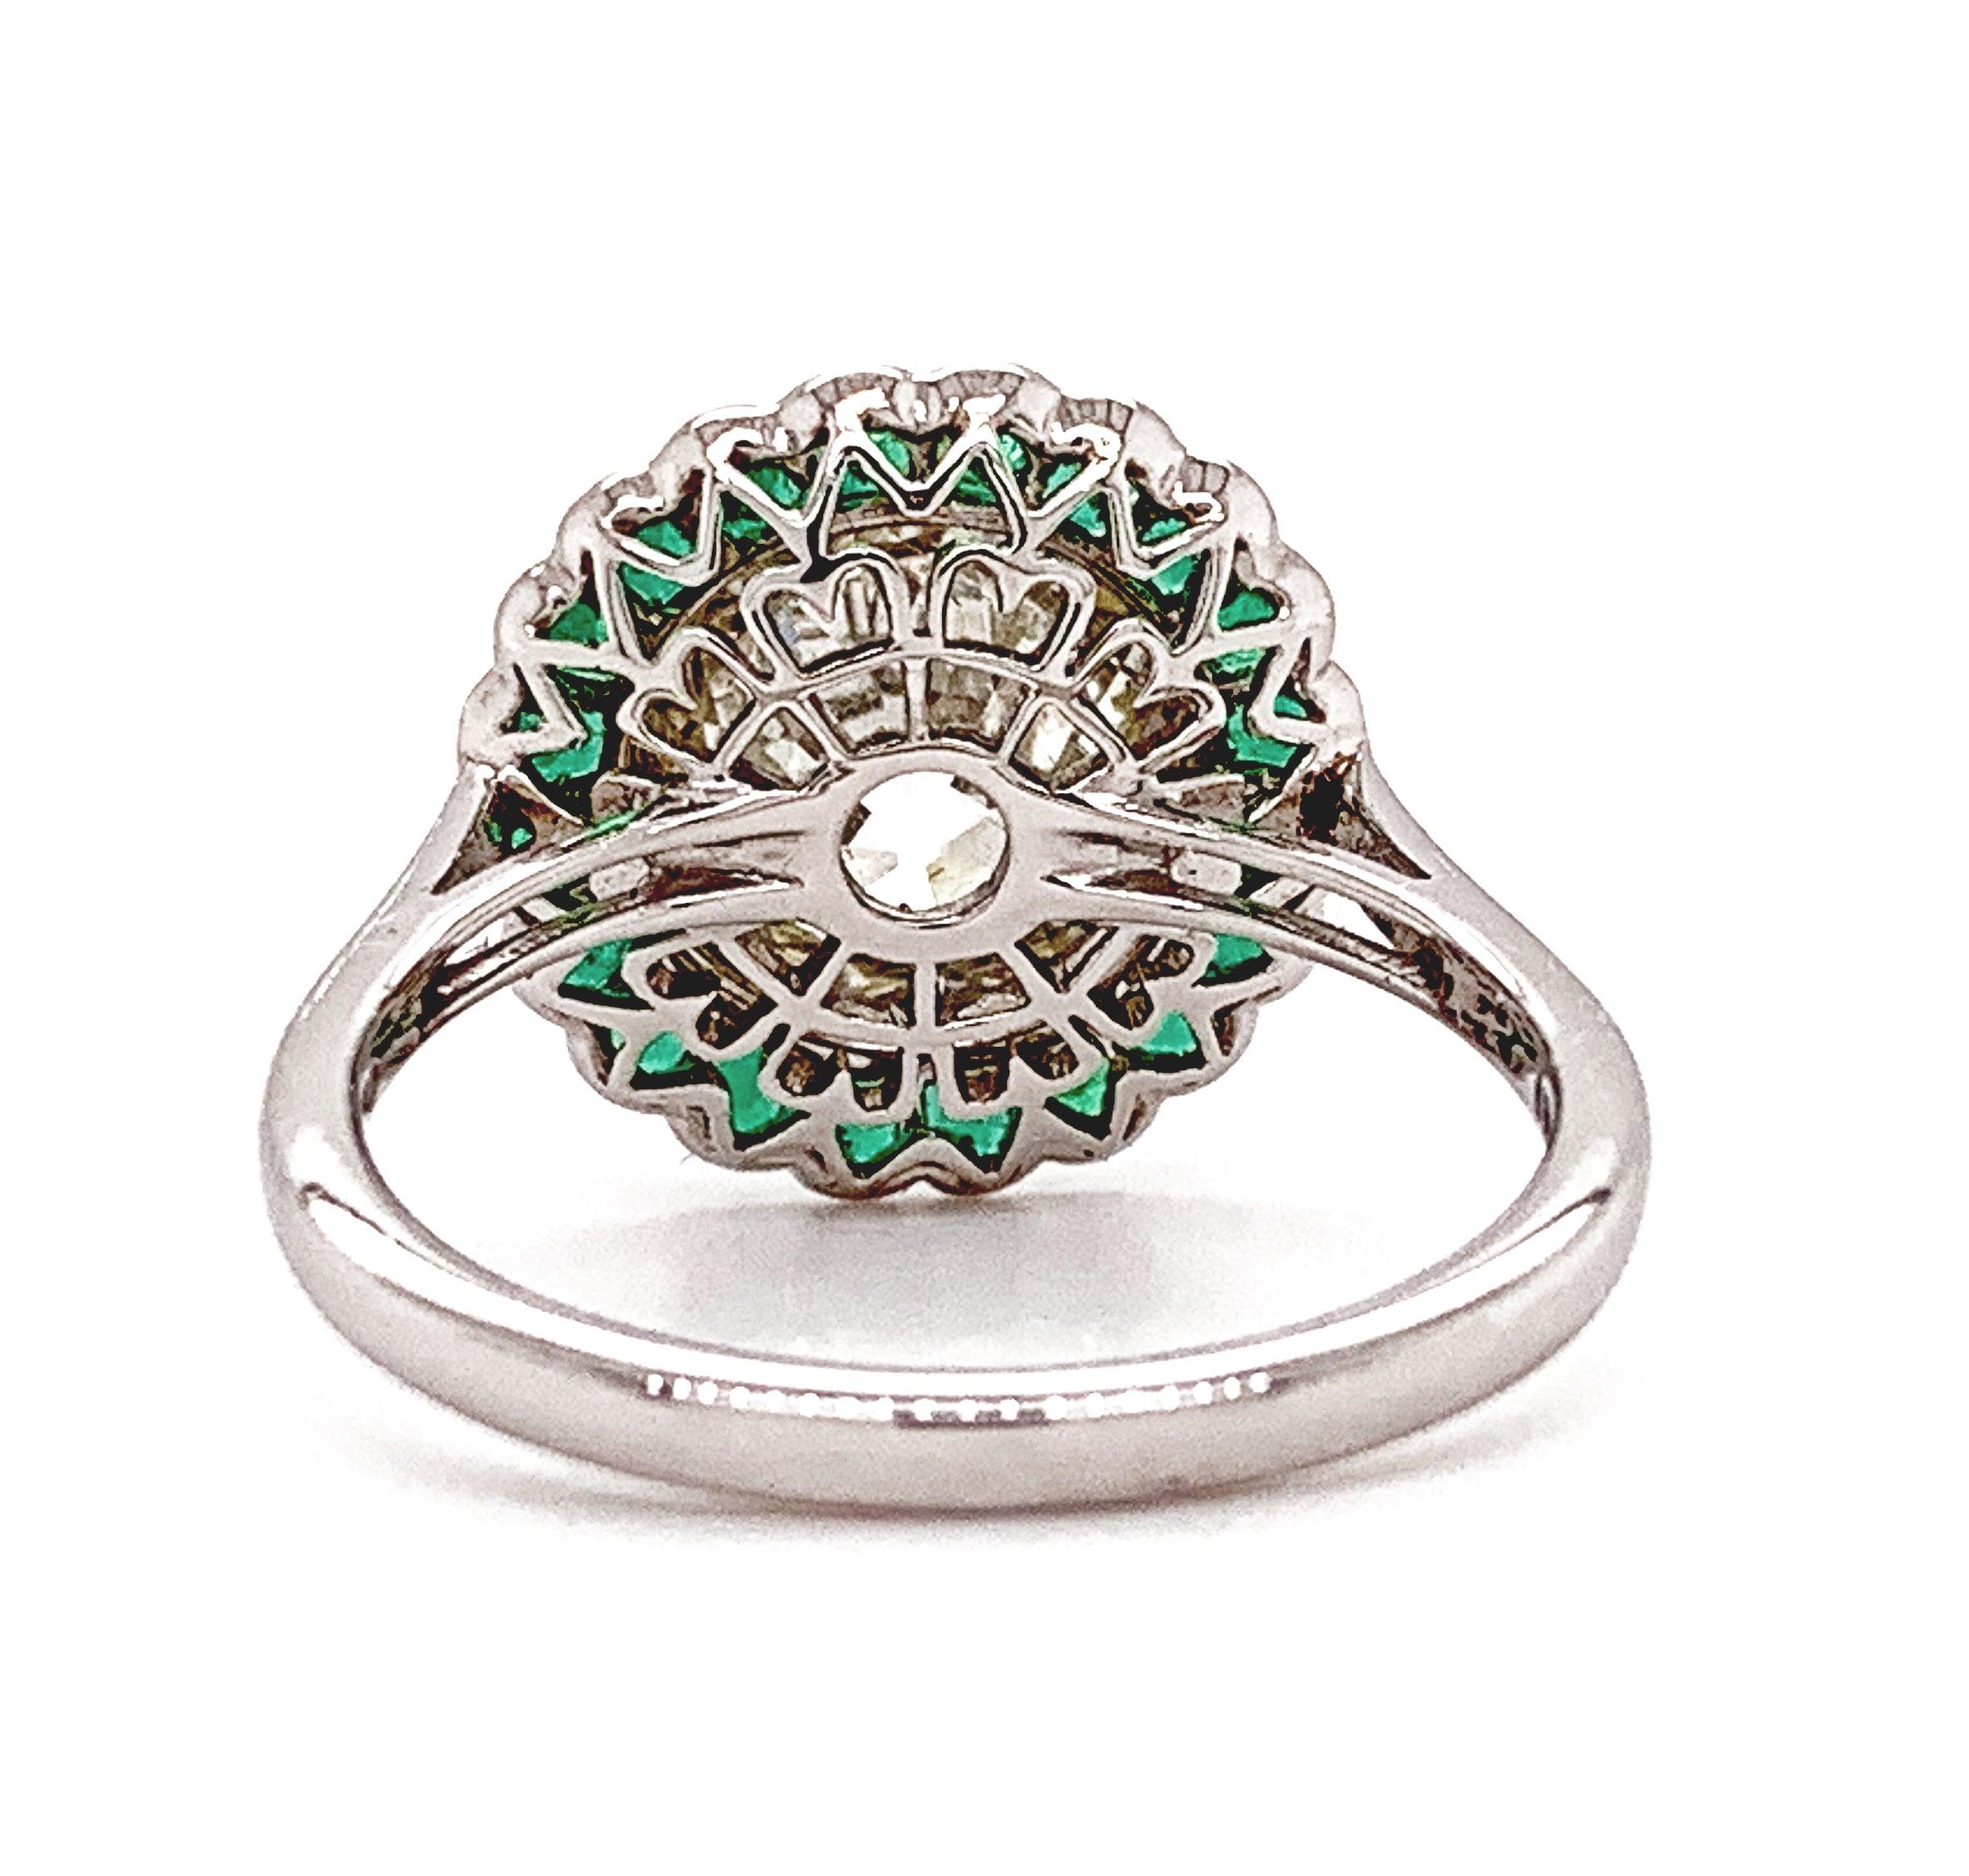 For Sale:  Sophia D, GIA Certified 2.54 Carat Diamond and Emerald Ring 4